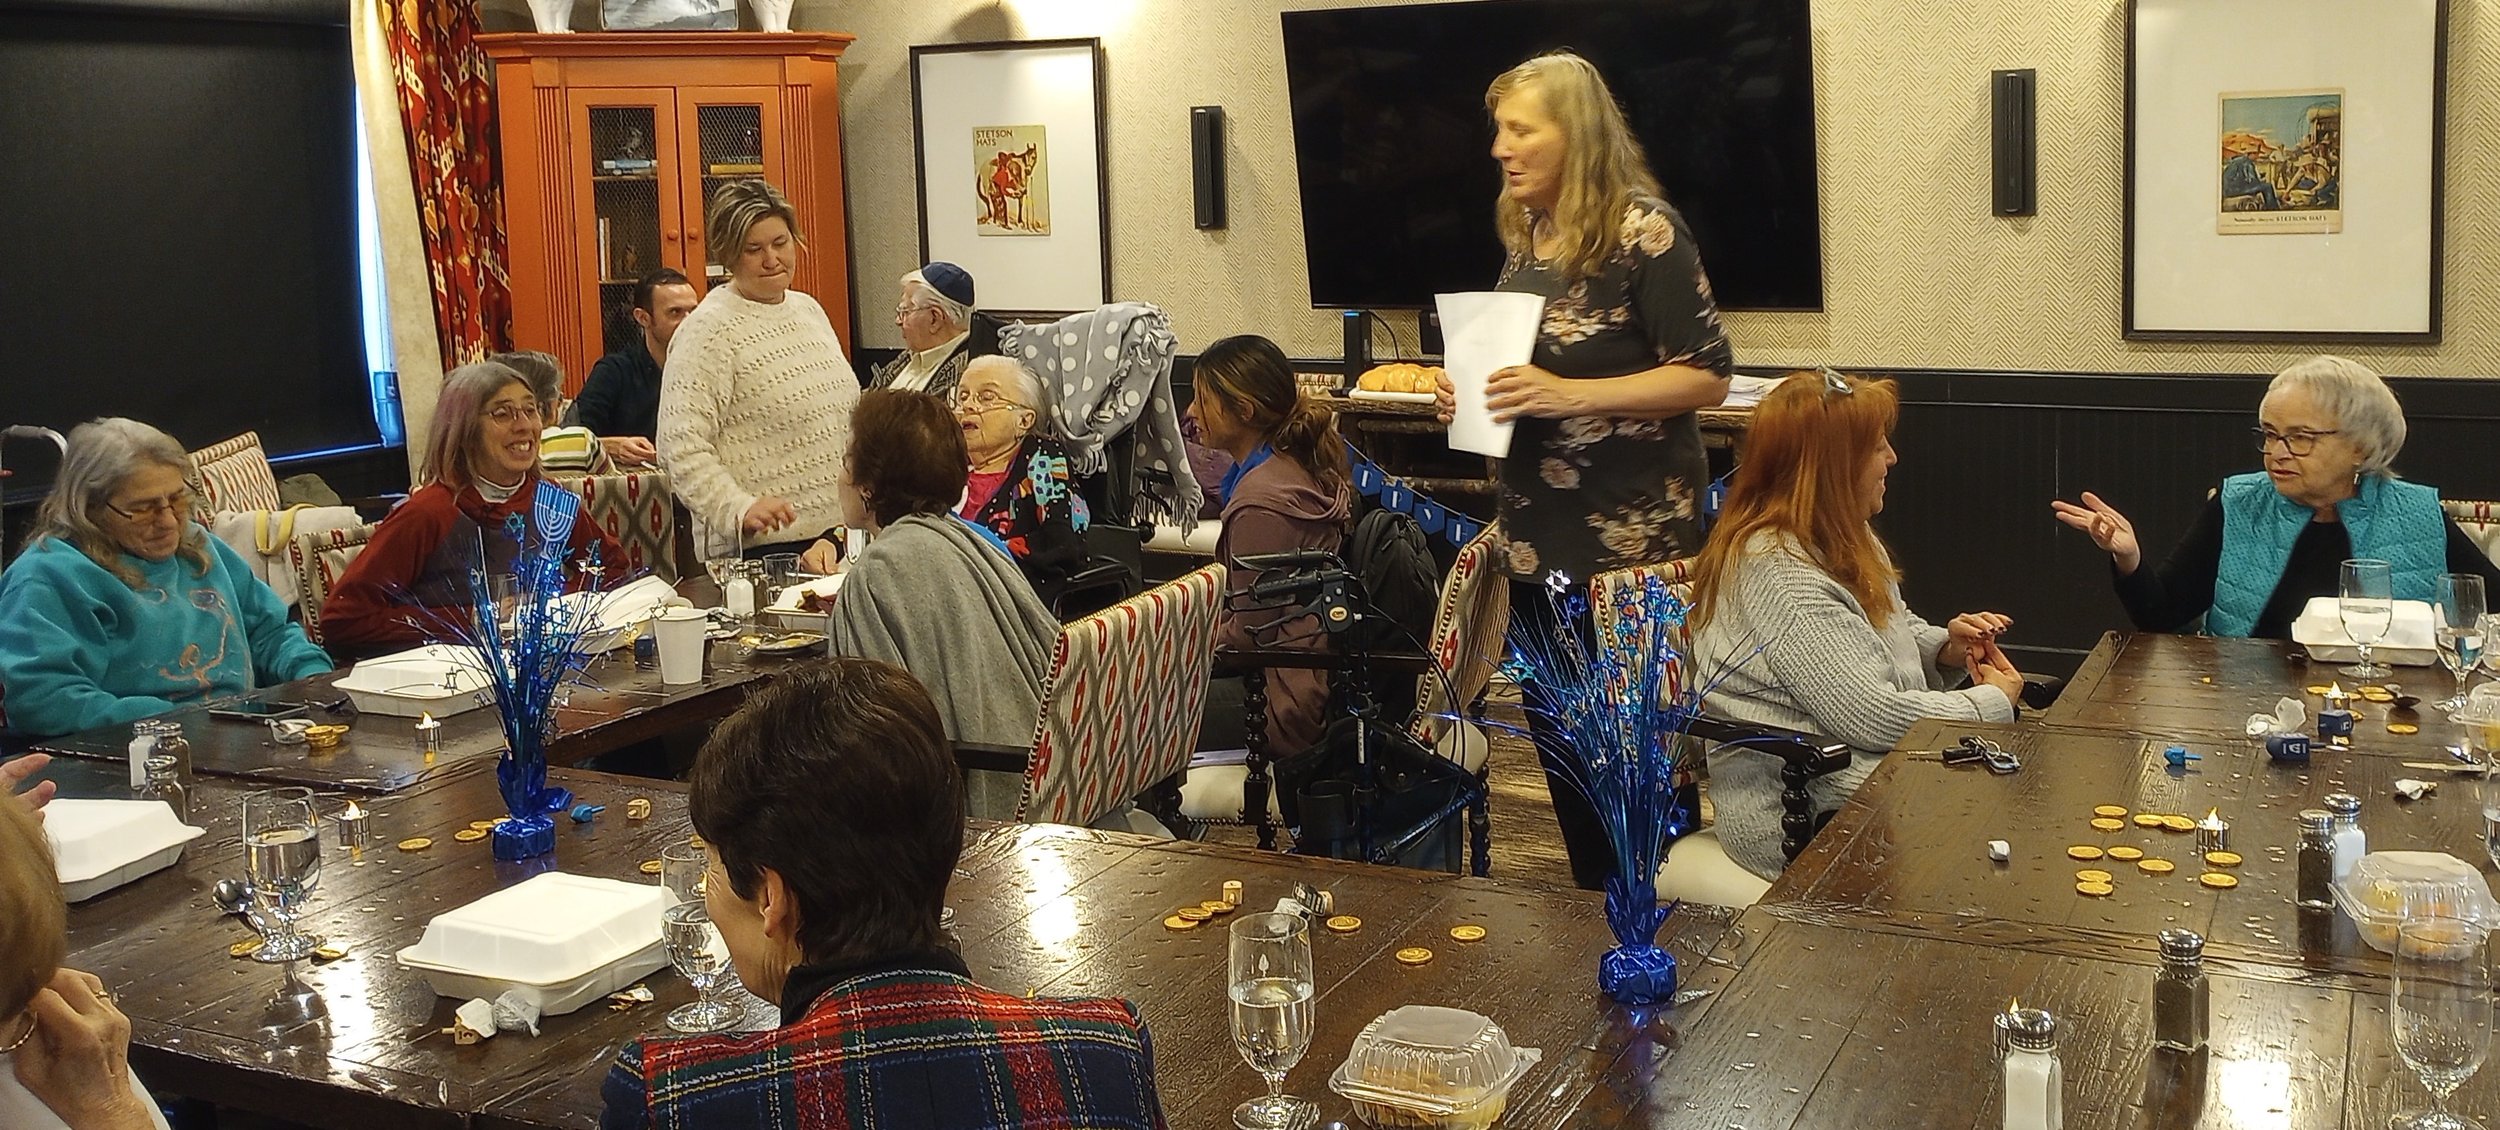 JFS Boulder Community Outreach Liaison leads a lively discussion on the meaning of the holiday at Balfour Lodge.jpg